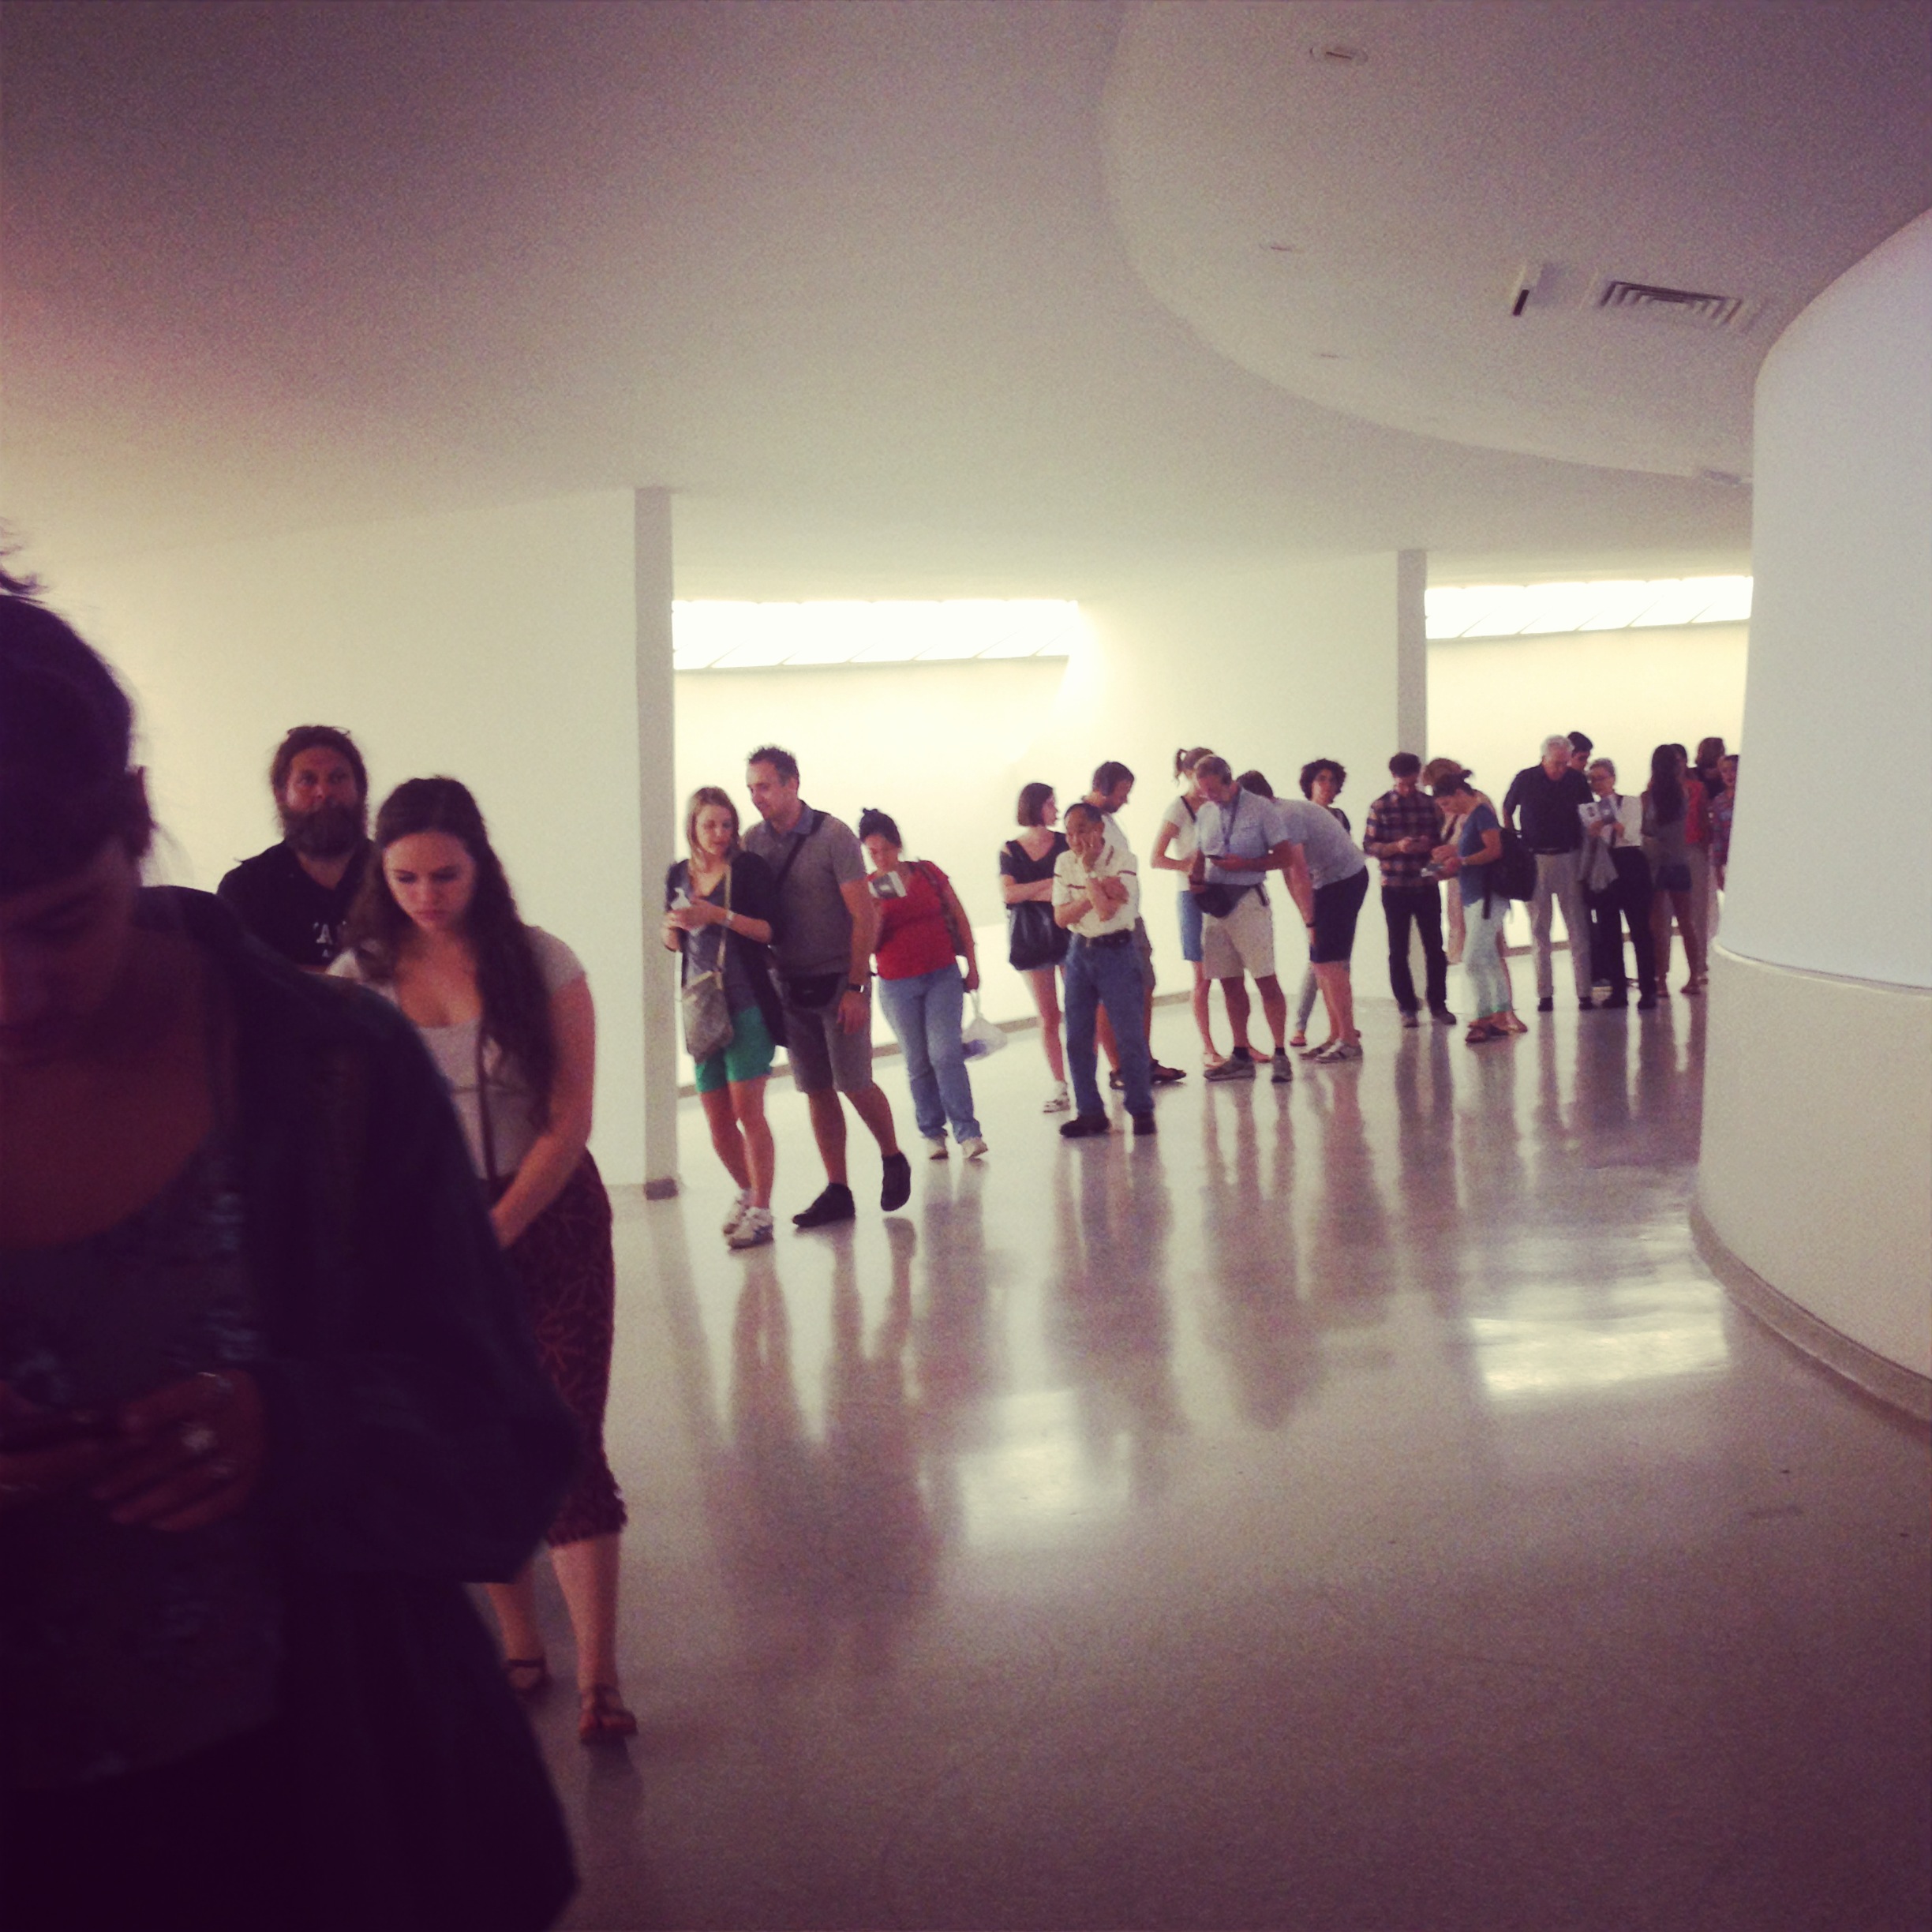 We weren't the only ones excited to see the James Turrell exhibit at the Guggenheim in New York City